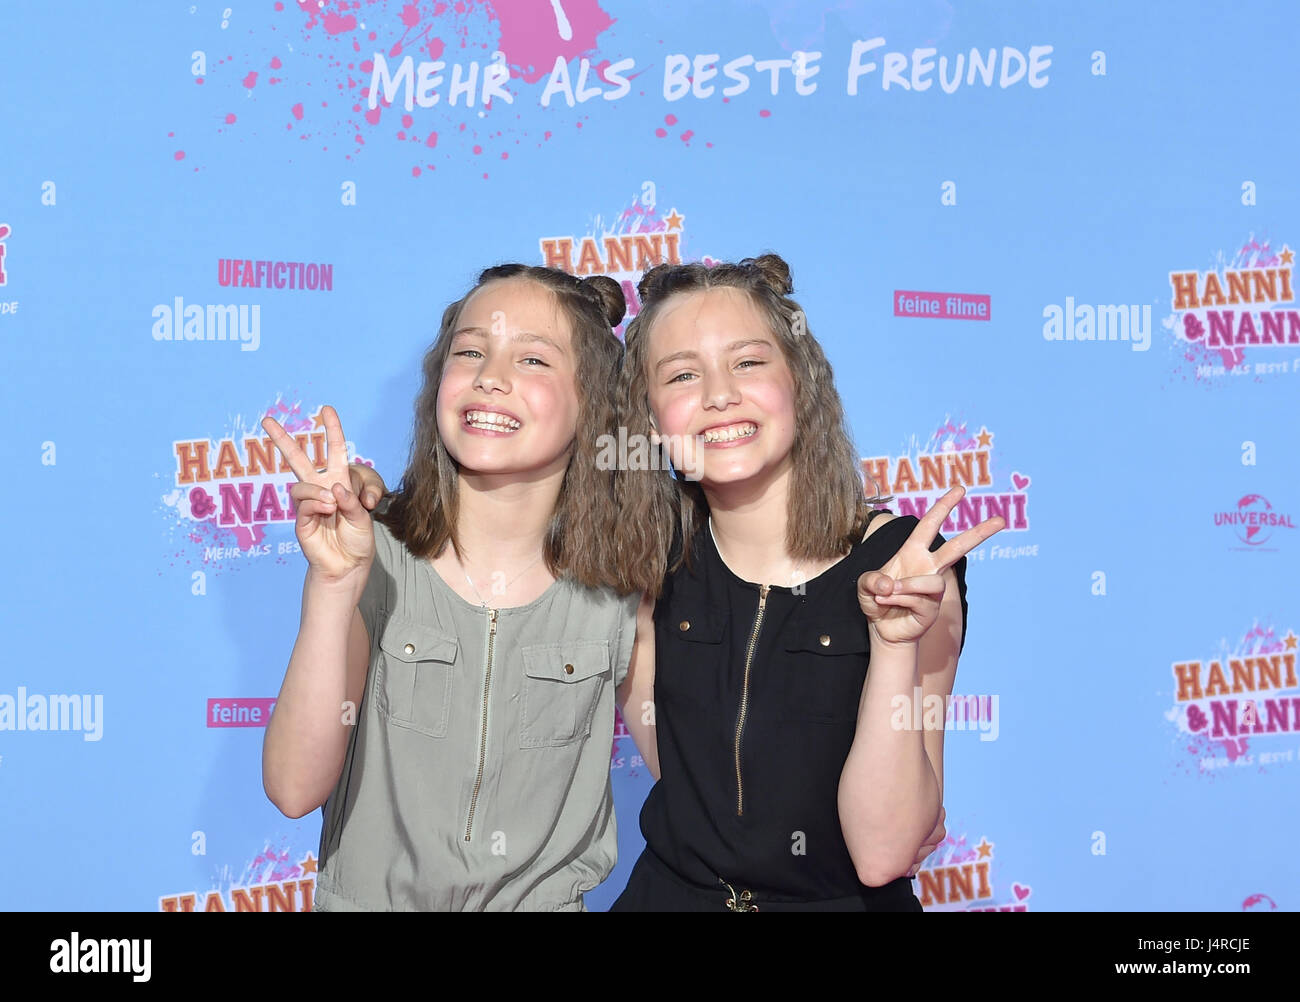 Berlin, Germany. 14th May, 2017. Actresses Laila and Rosa Meinecke arrive  at the world premiere of 'Hanni & Nanni - Mehr als beste Freunde' (lit.  'More than best friends') at the Kino